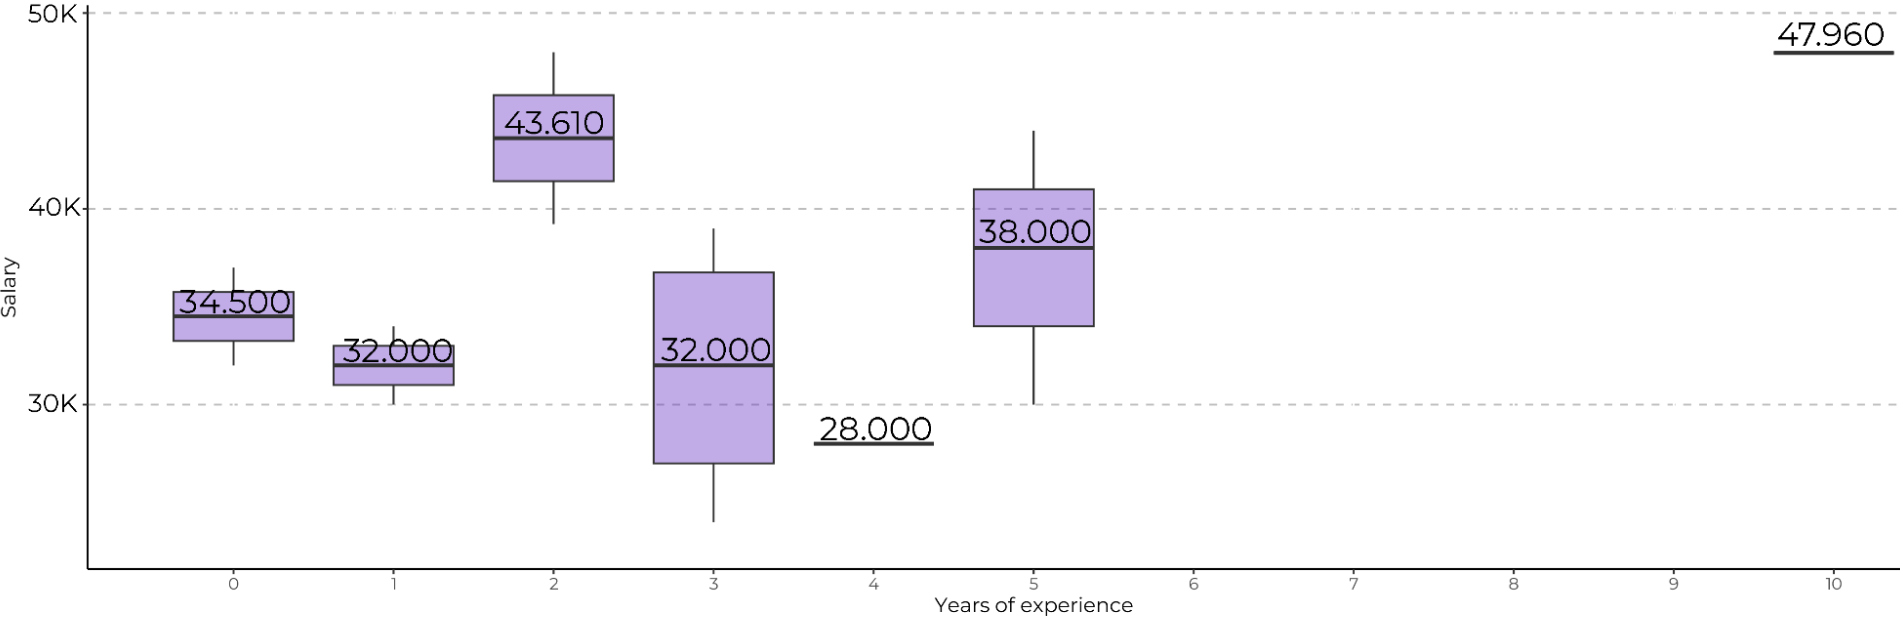 Graph showing salary ranges by years of experience for Digital designers.